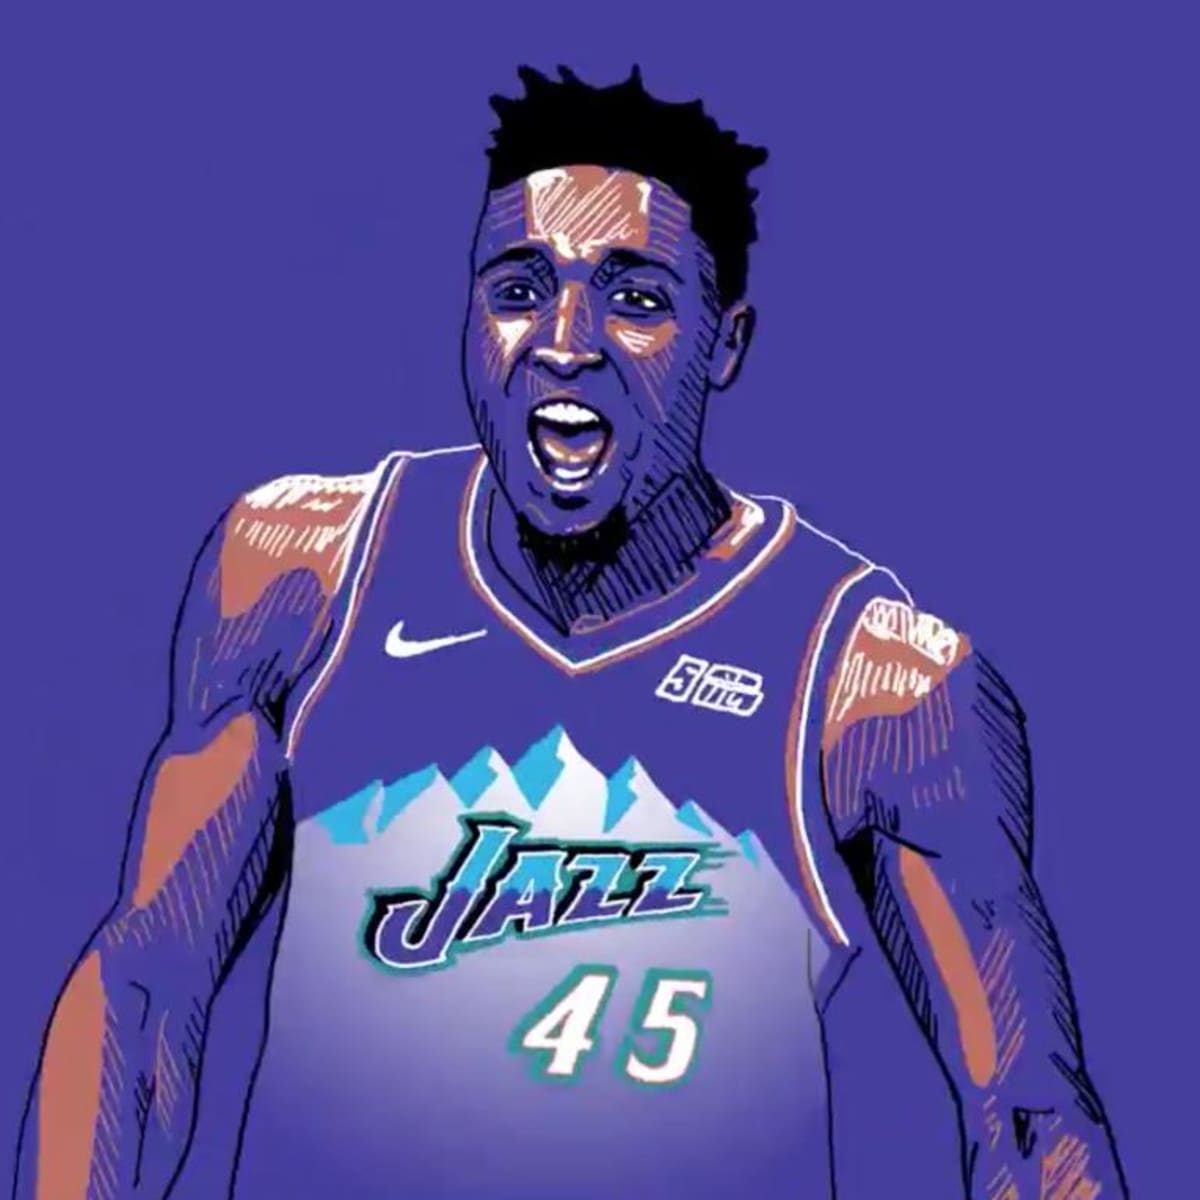 Jazz to wear mountain throwbacks in honor of 90s Finals teams